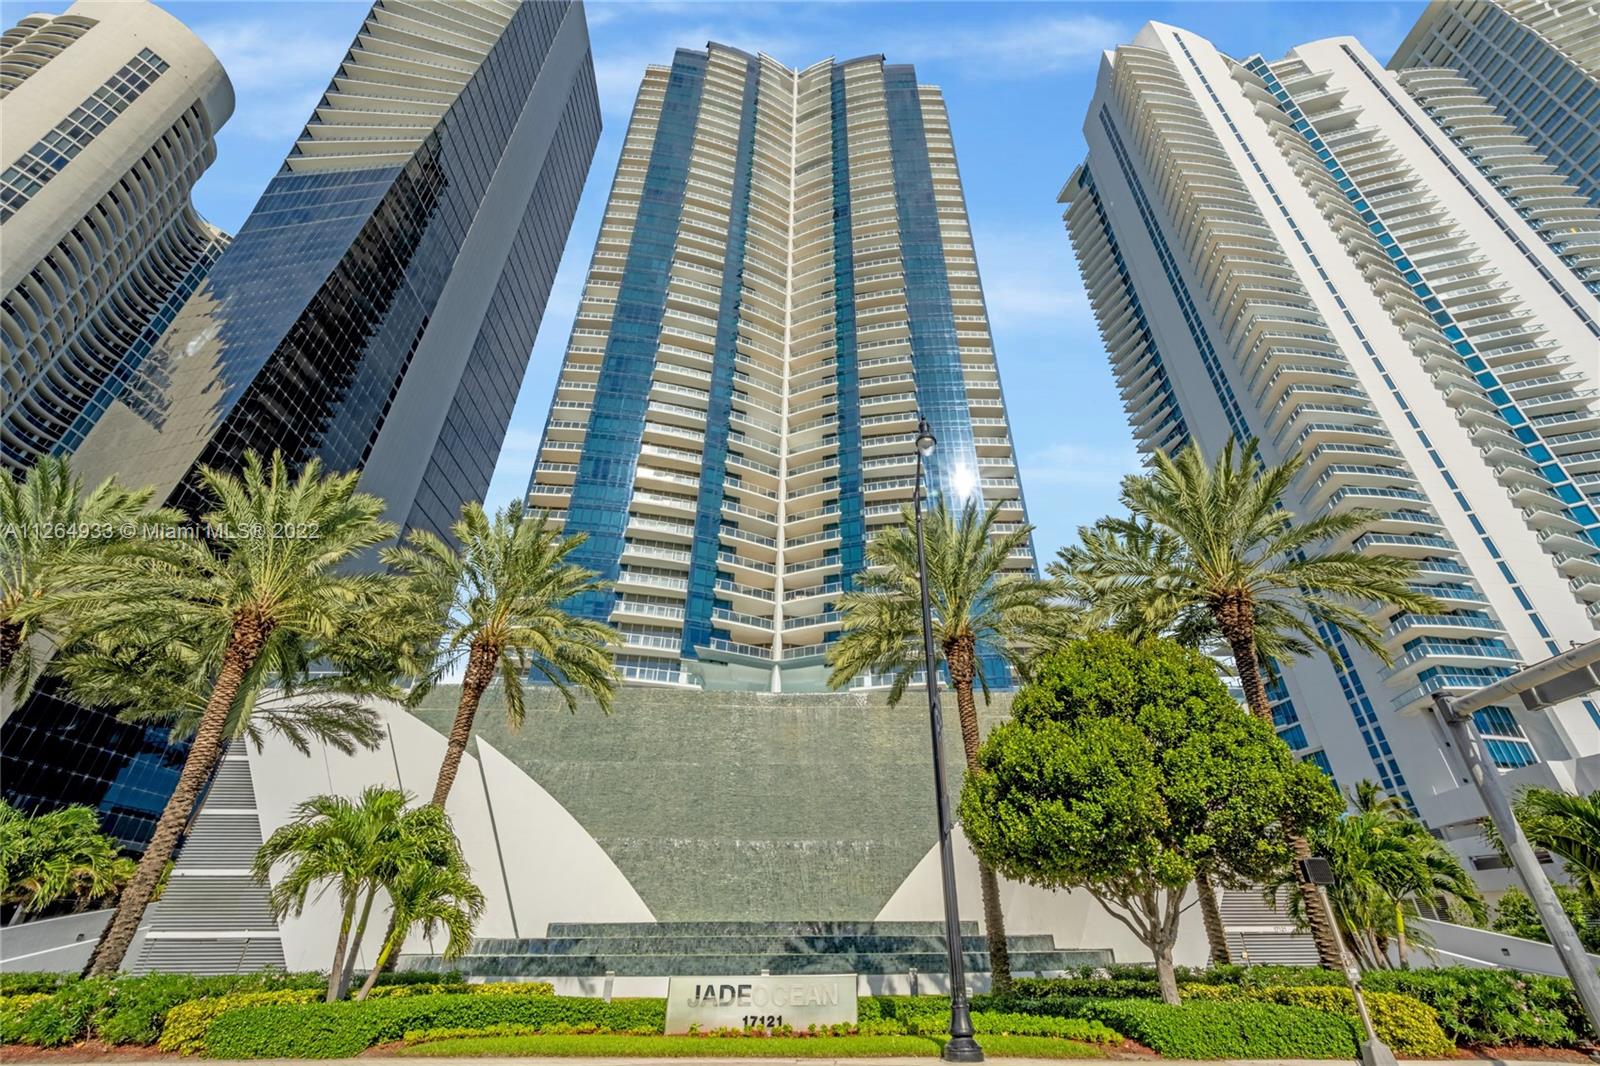 Enjoy this amazing apartment. This stunning condo has 3 bedrooms, 3 bathrooms and a balcony that spills to the ocean. It is full furnished and has luxury amenities. It has an excellent location in Sunny Isles Beach. The shops and restaurants are a short walk away.